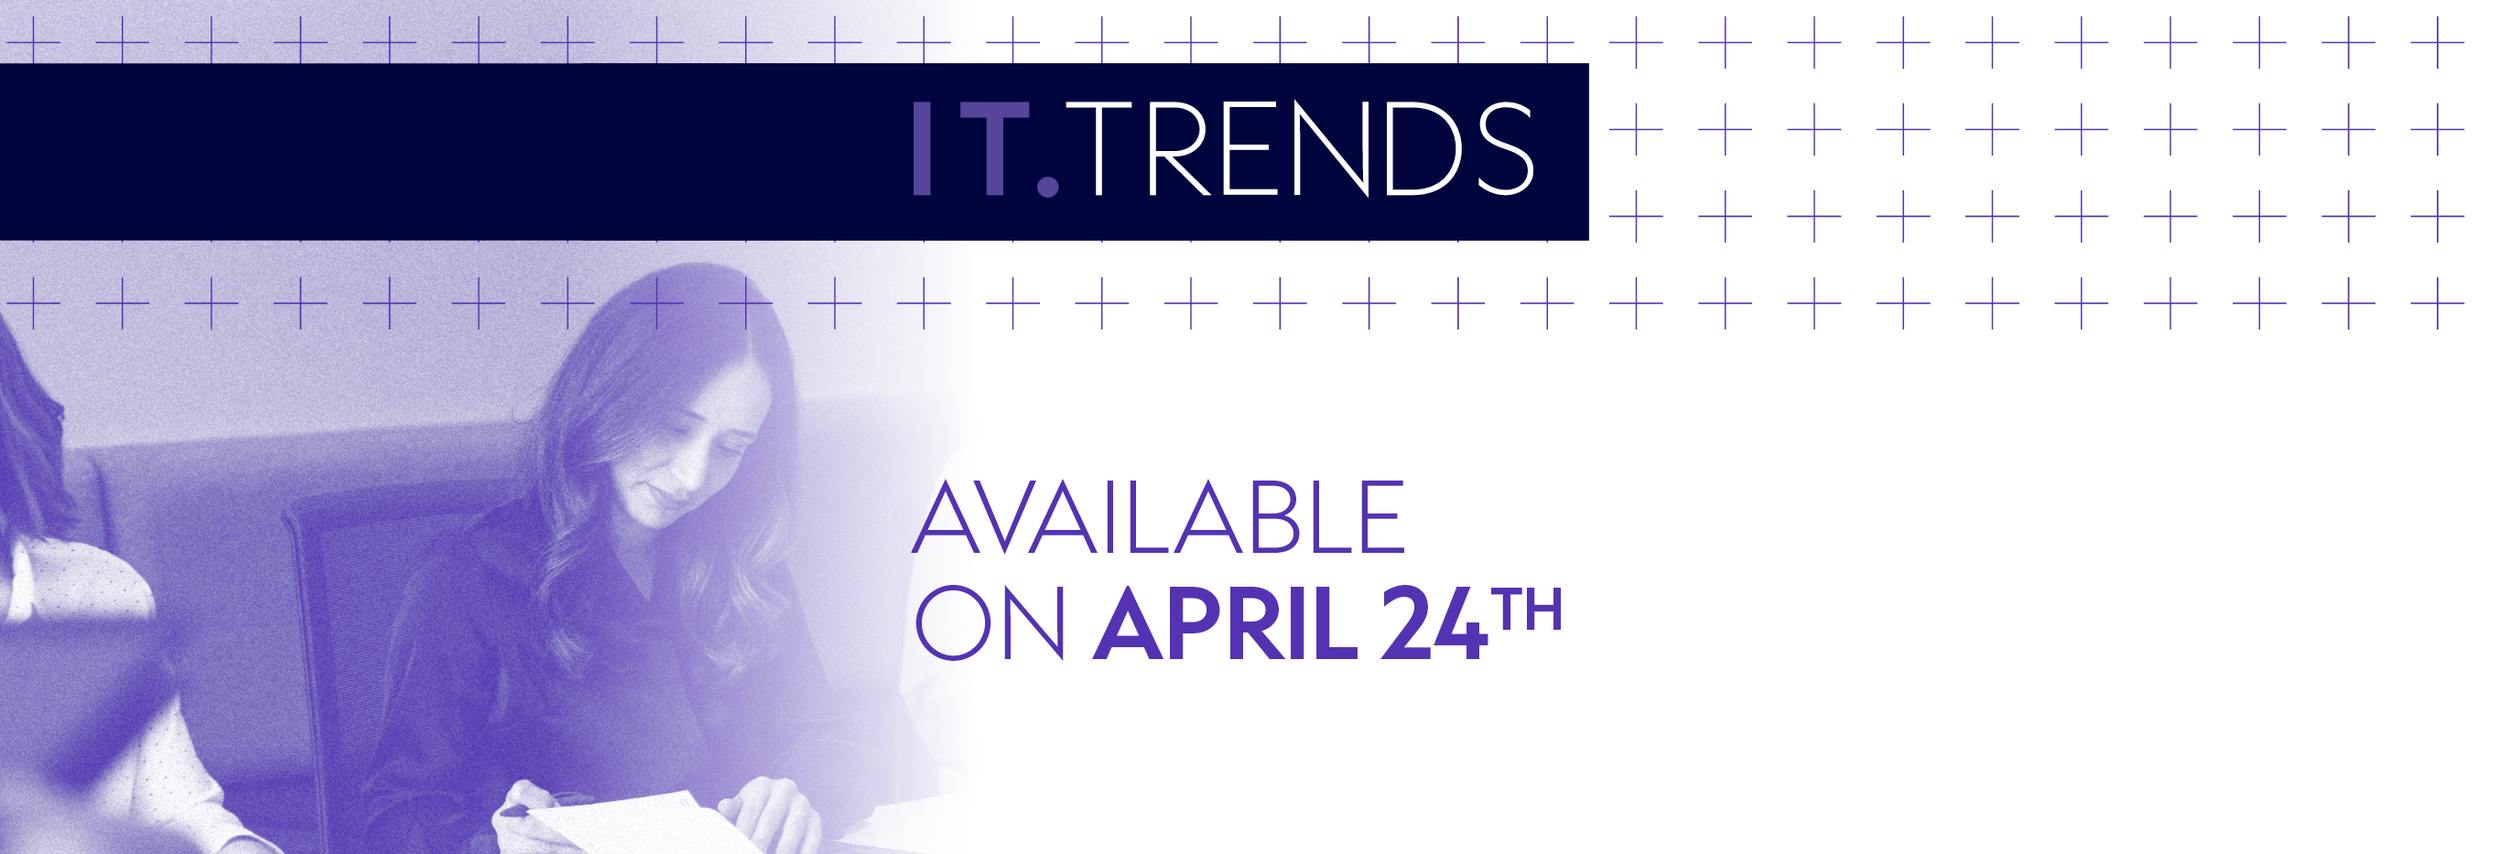 IT TRENDS 8TH EDITION AVAILABLE SOON